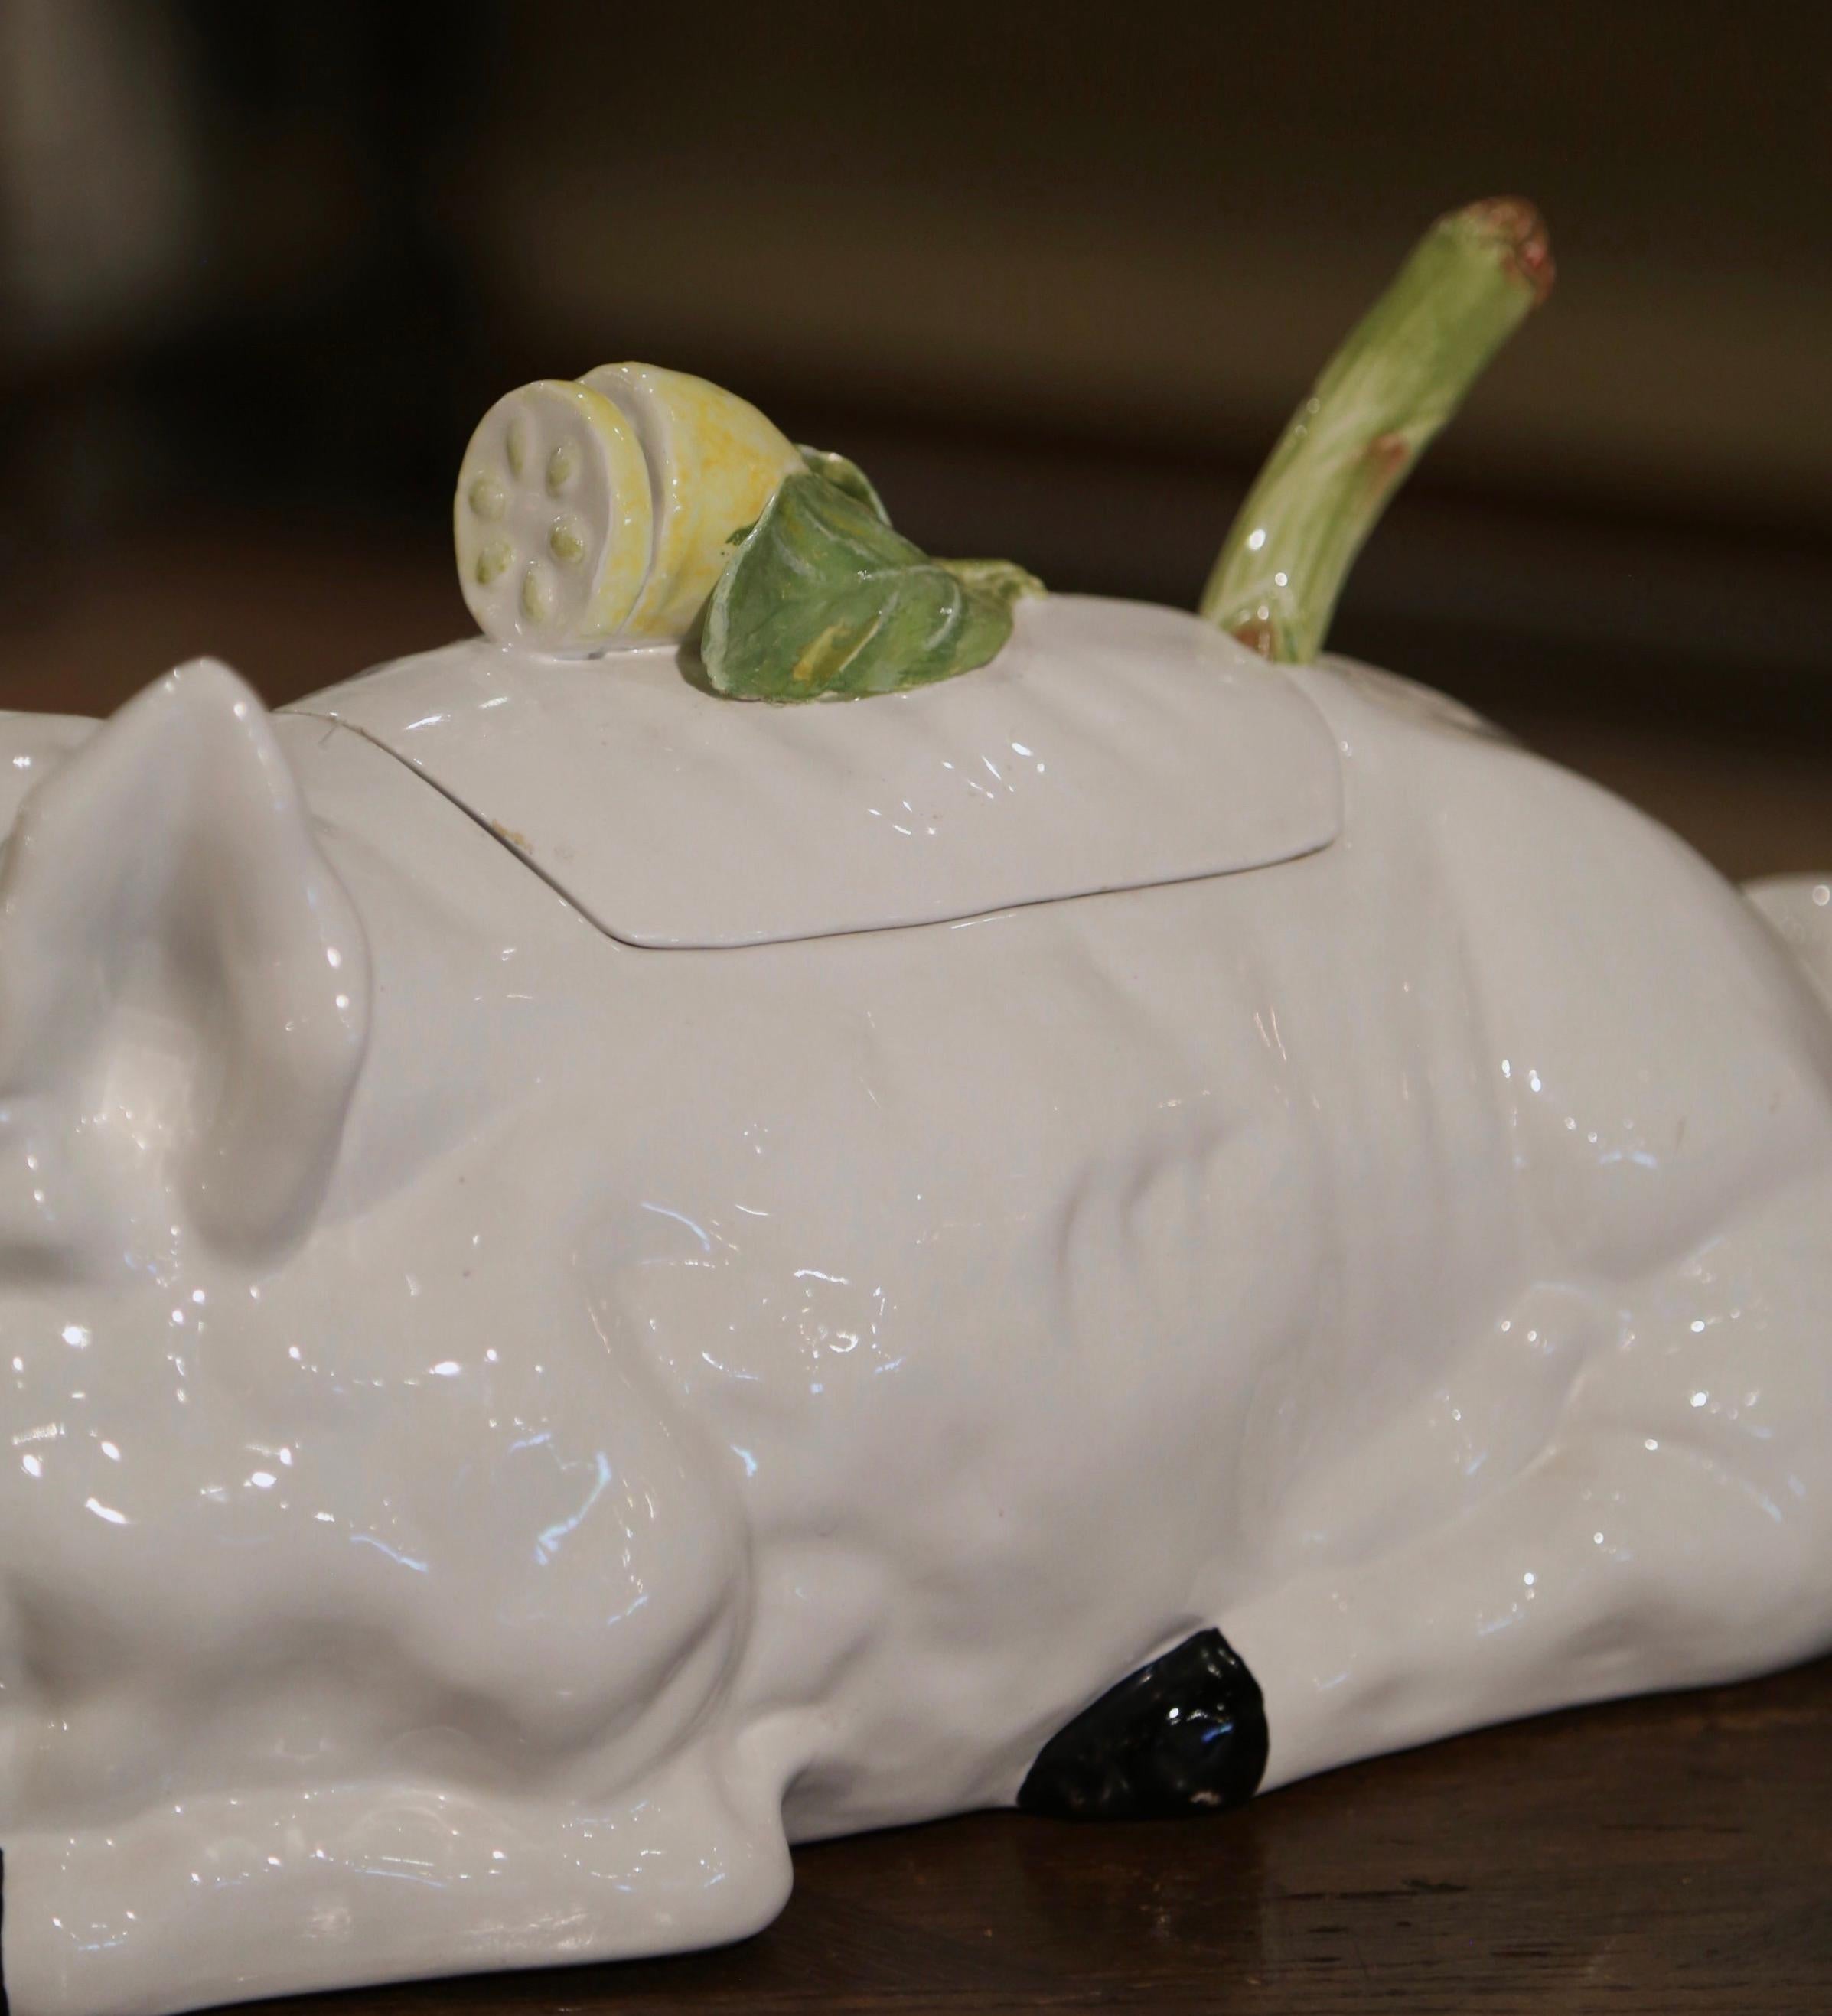 Vintage Italian Majolica Porcelain Pig-Form Soup Tureen with Lid and Ladle In Excellent Condition For Sale In Dallas, TX